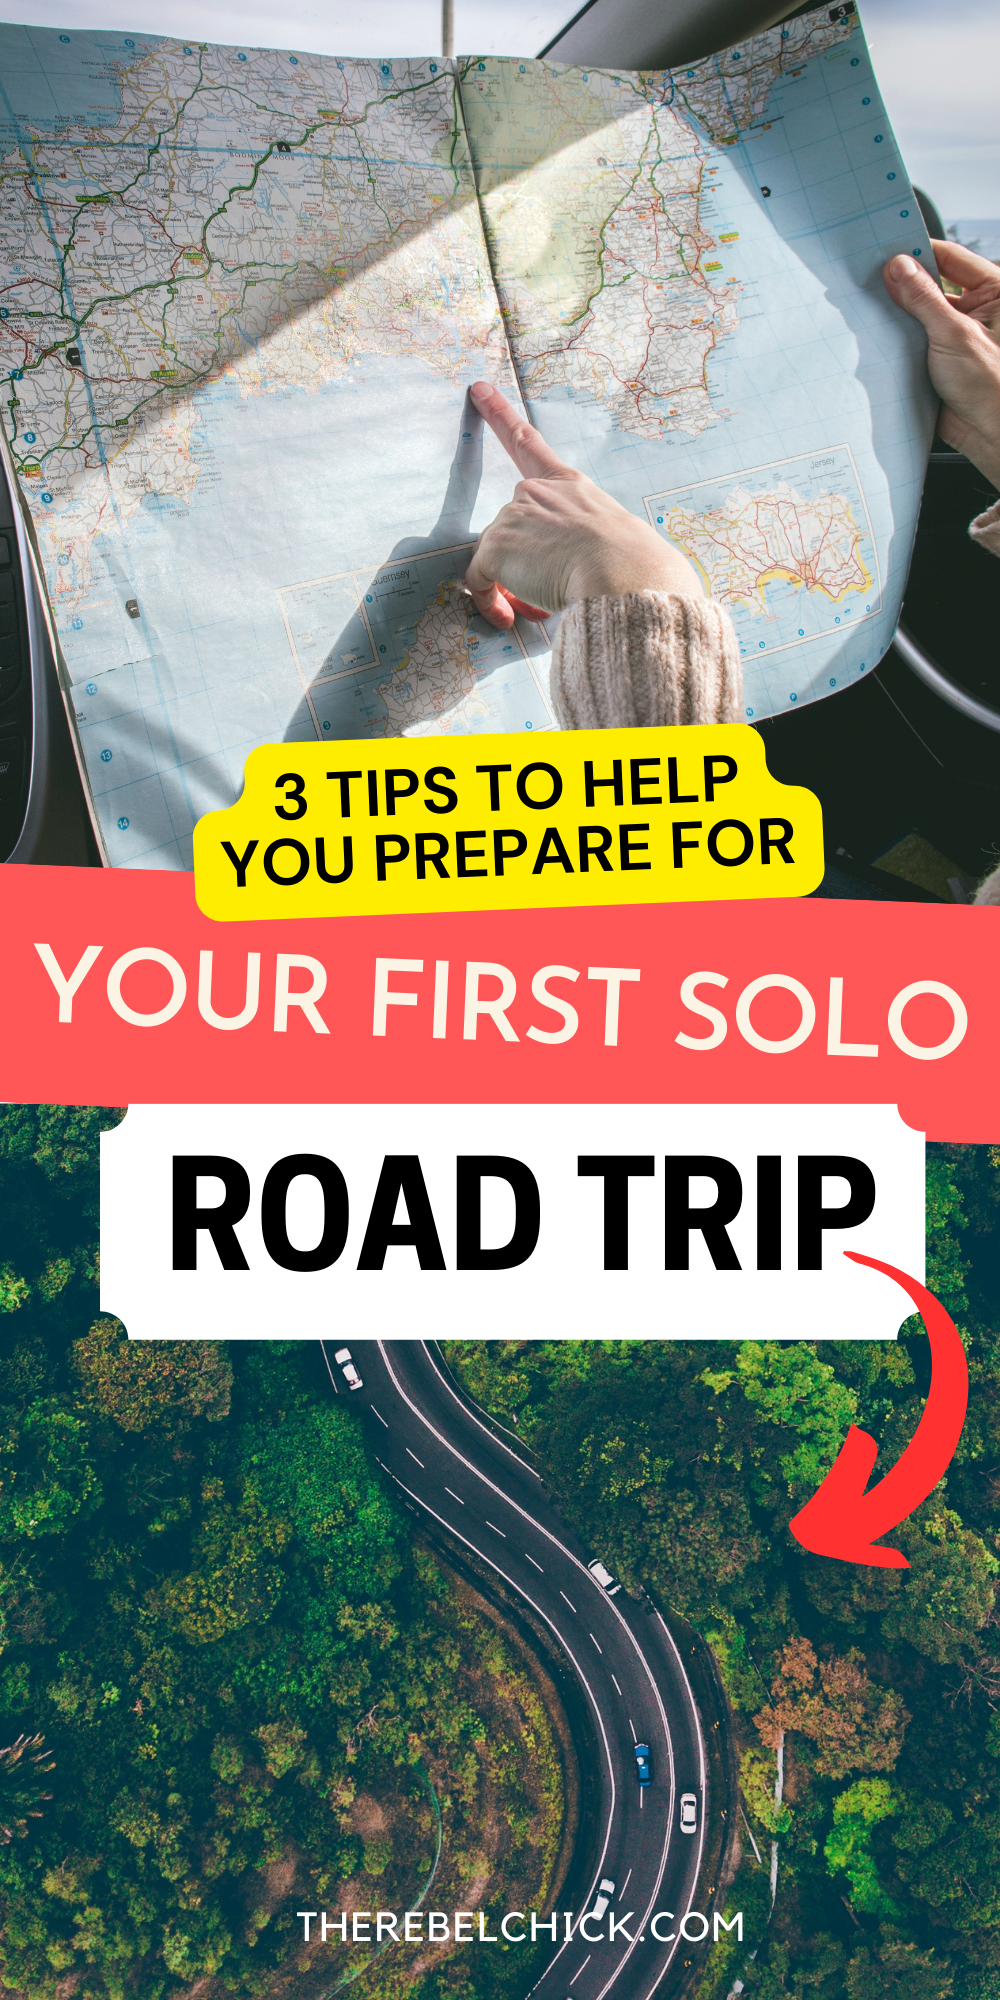 3 Tips To Help You Prepare For Your First Solo Road Trip